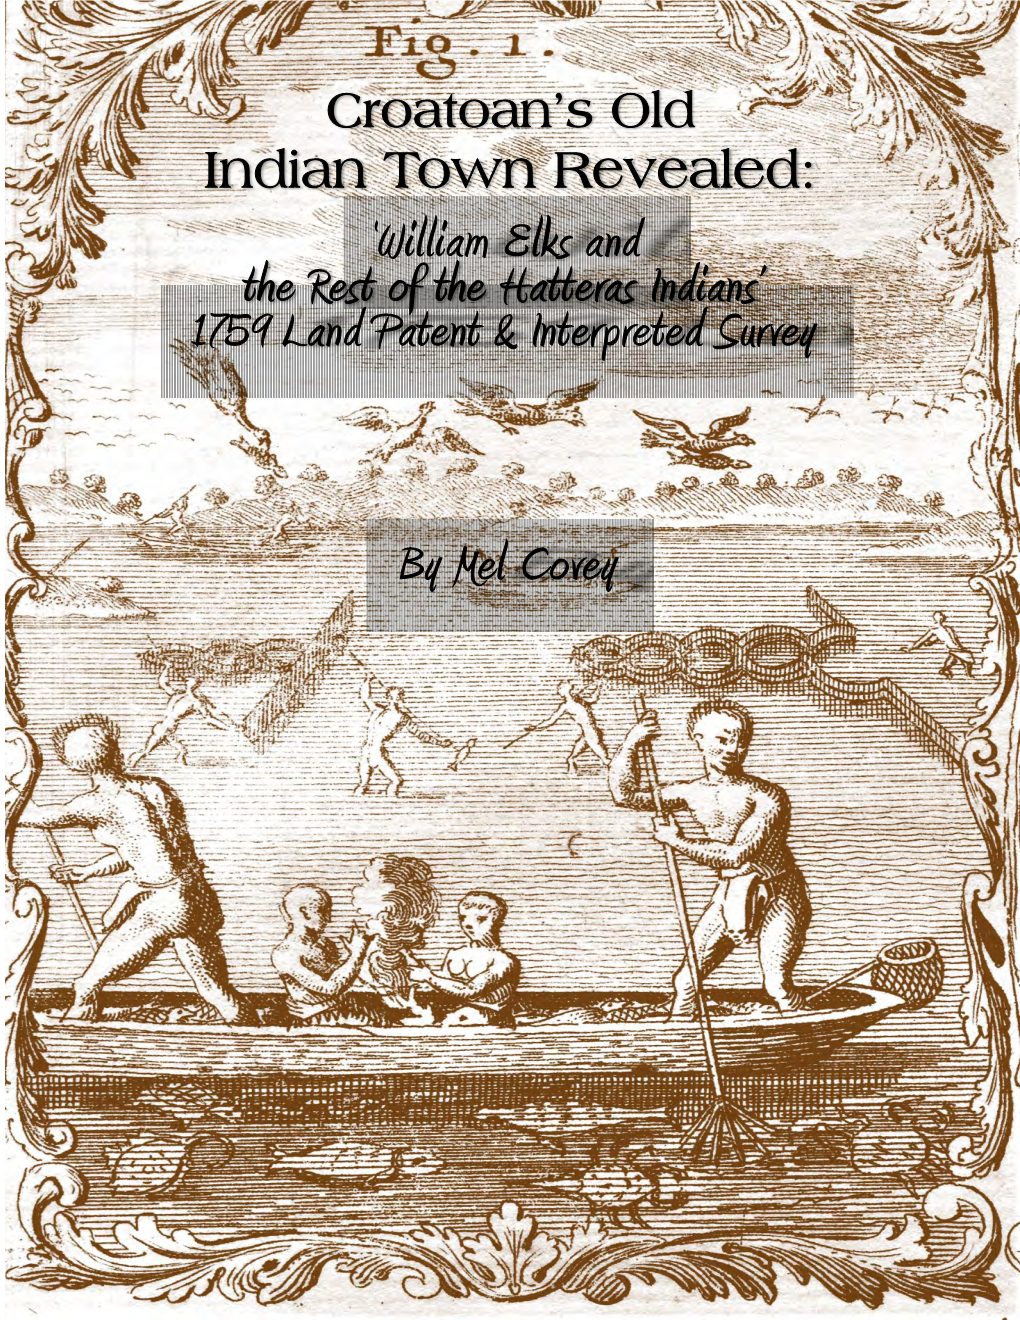 William Elks and the Rest of the Hatteras Indians’ 1759 Land Patent & Interpreted Survey